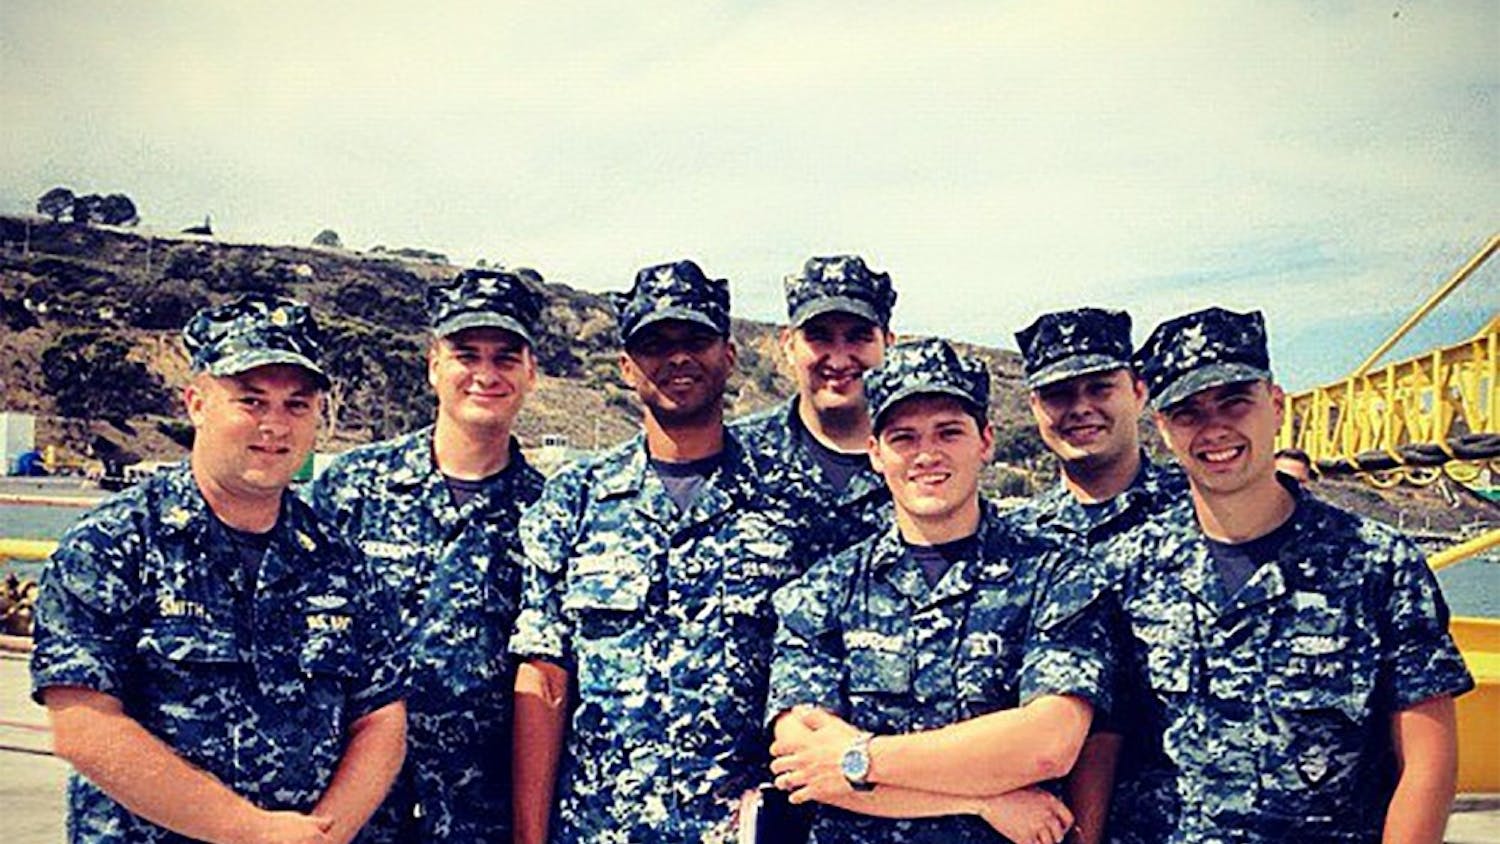 "Christopher Lorensen (second from the left) served six years in the Navy."